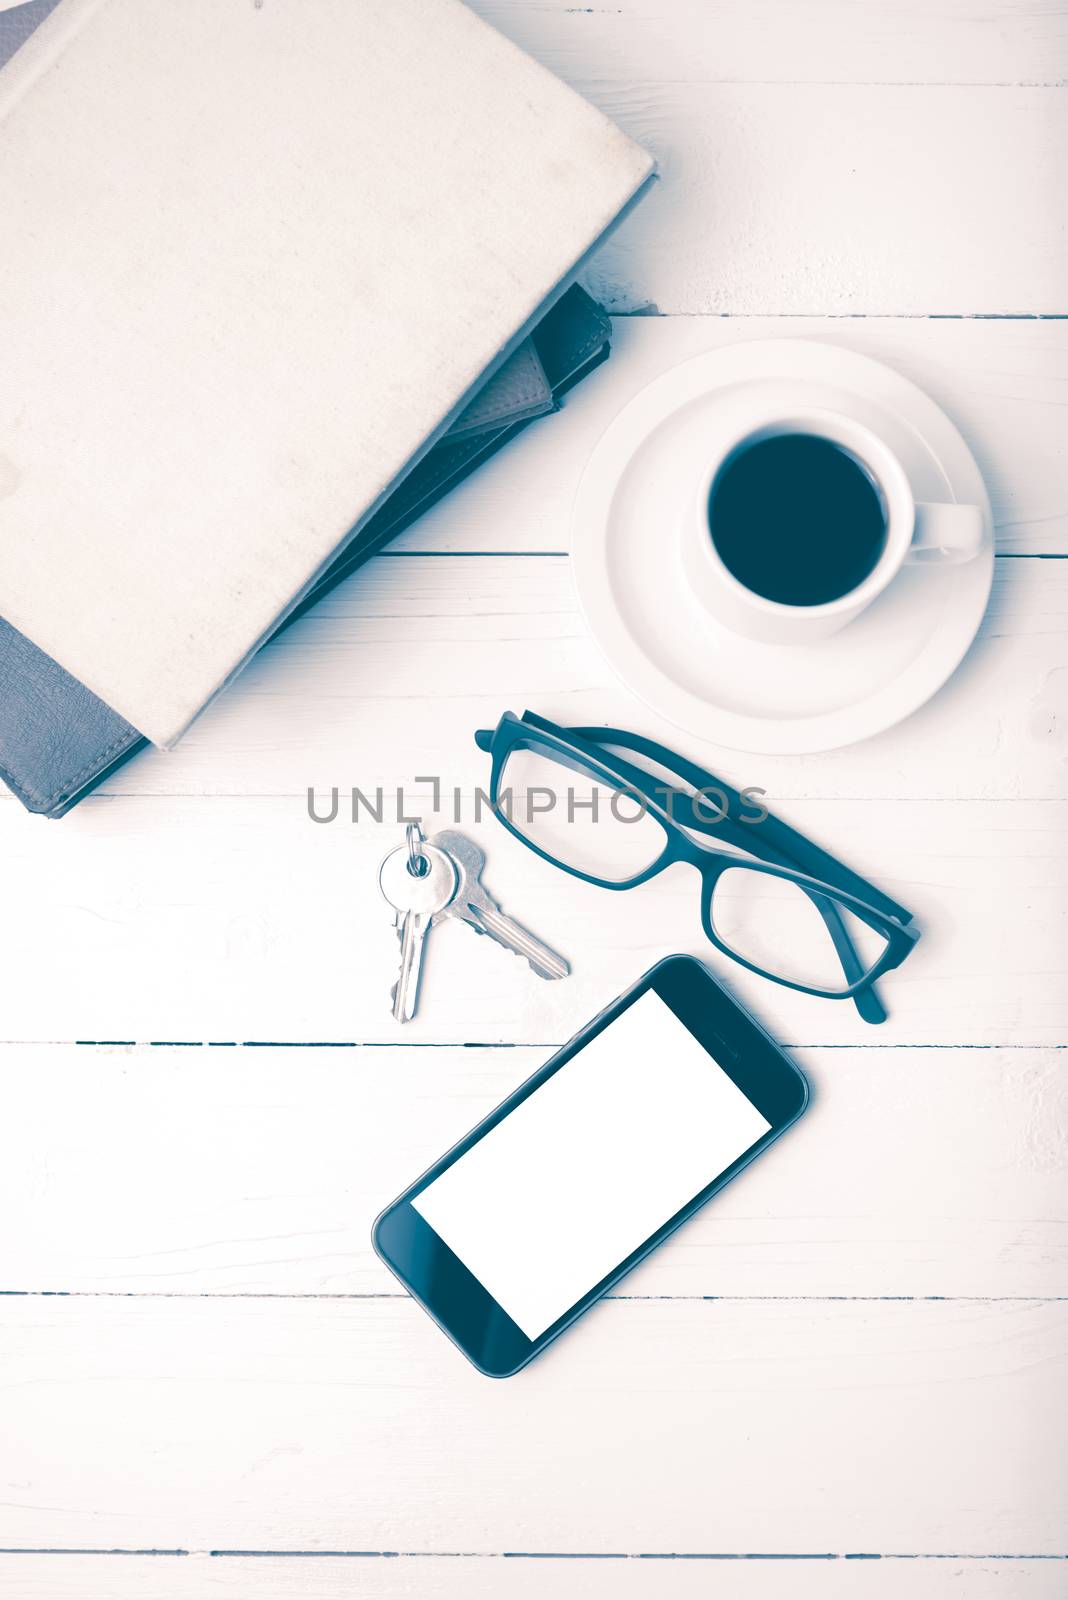 coffee cup with phone,key,eyeglasses and stack of book on white wood table vintage style